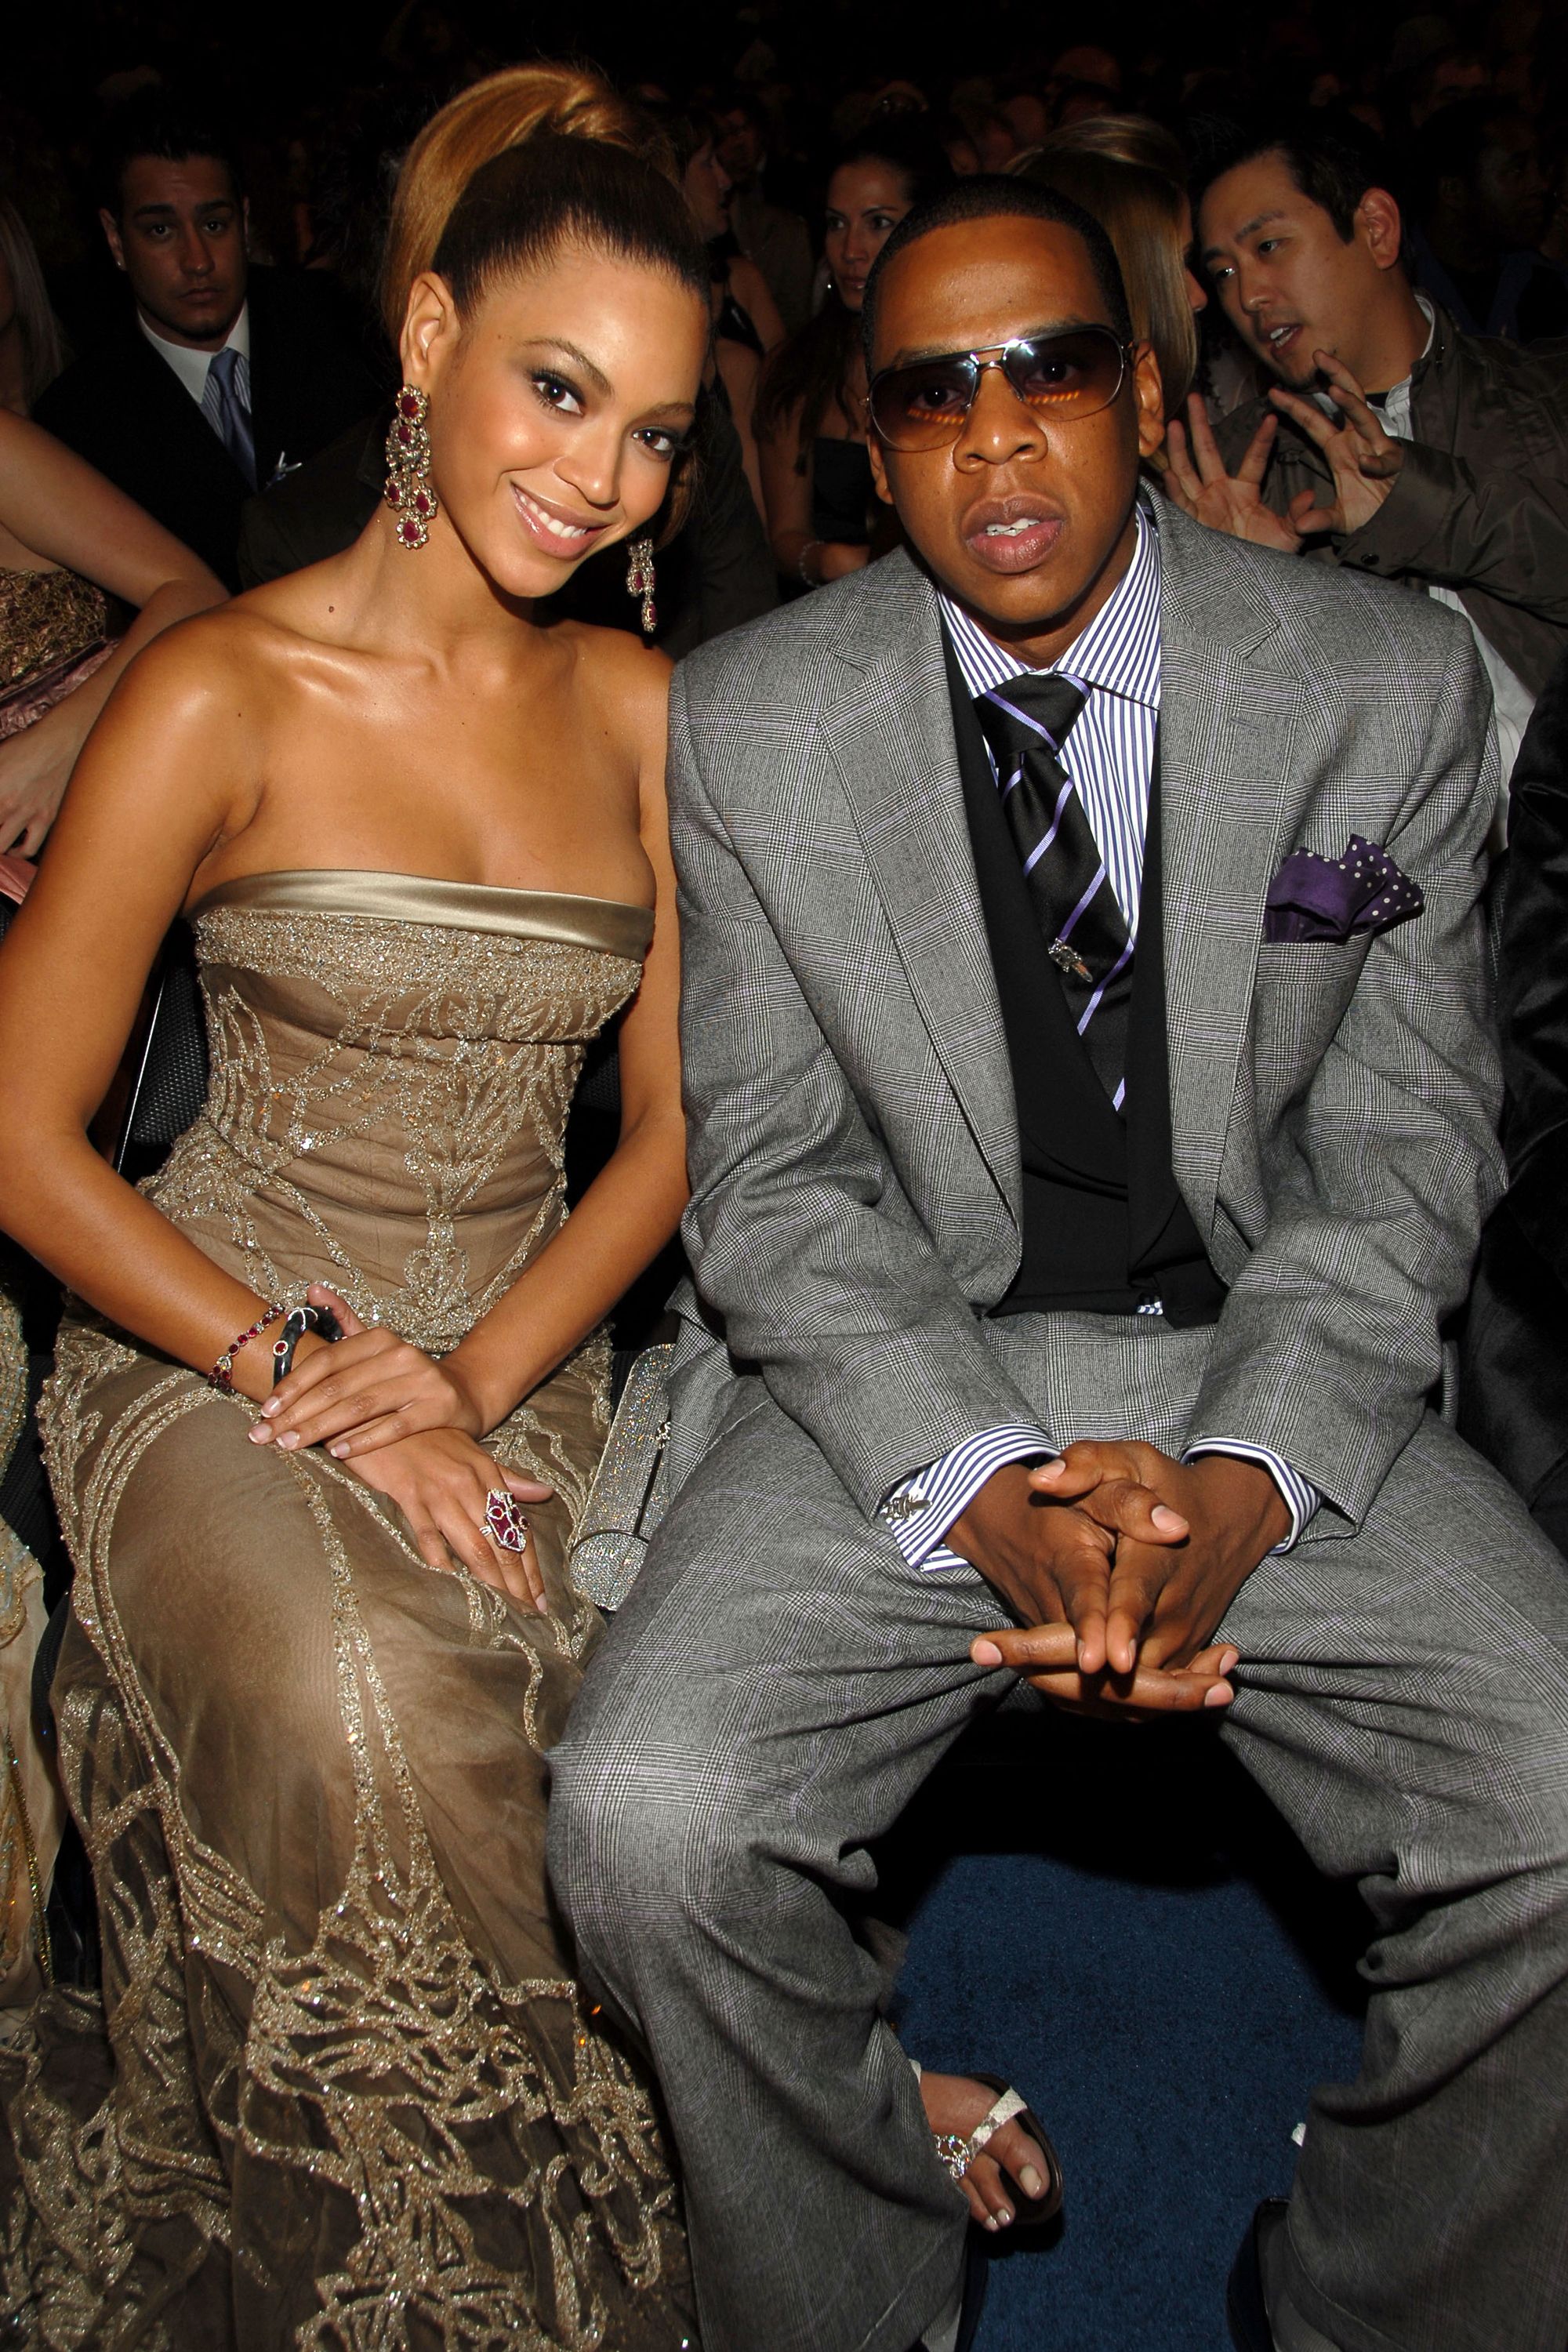 Beyoncé and Jay-Z's Sweetest Couple Moments and Photos